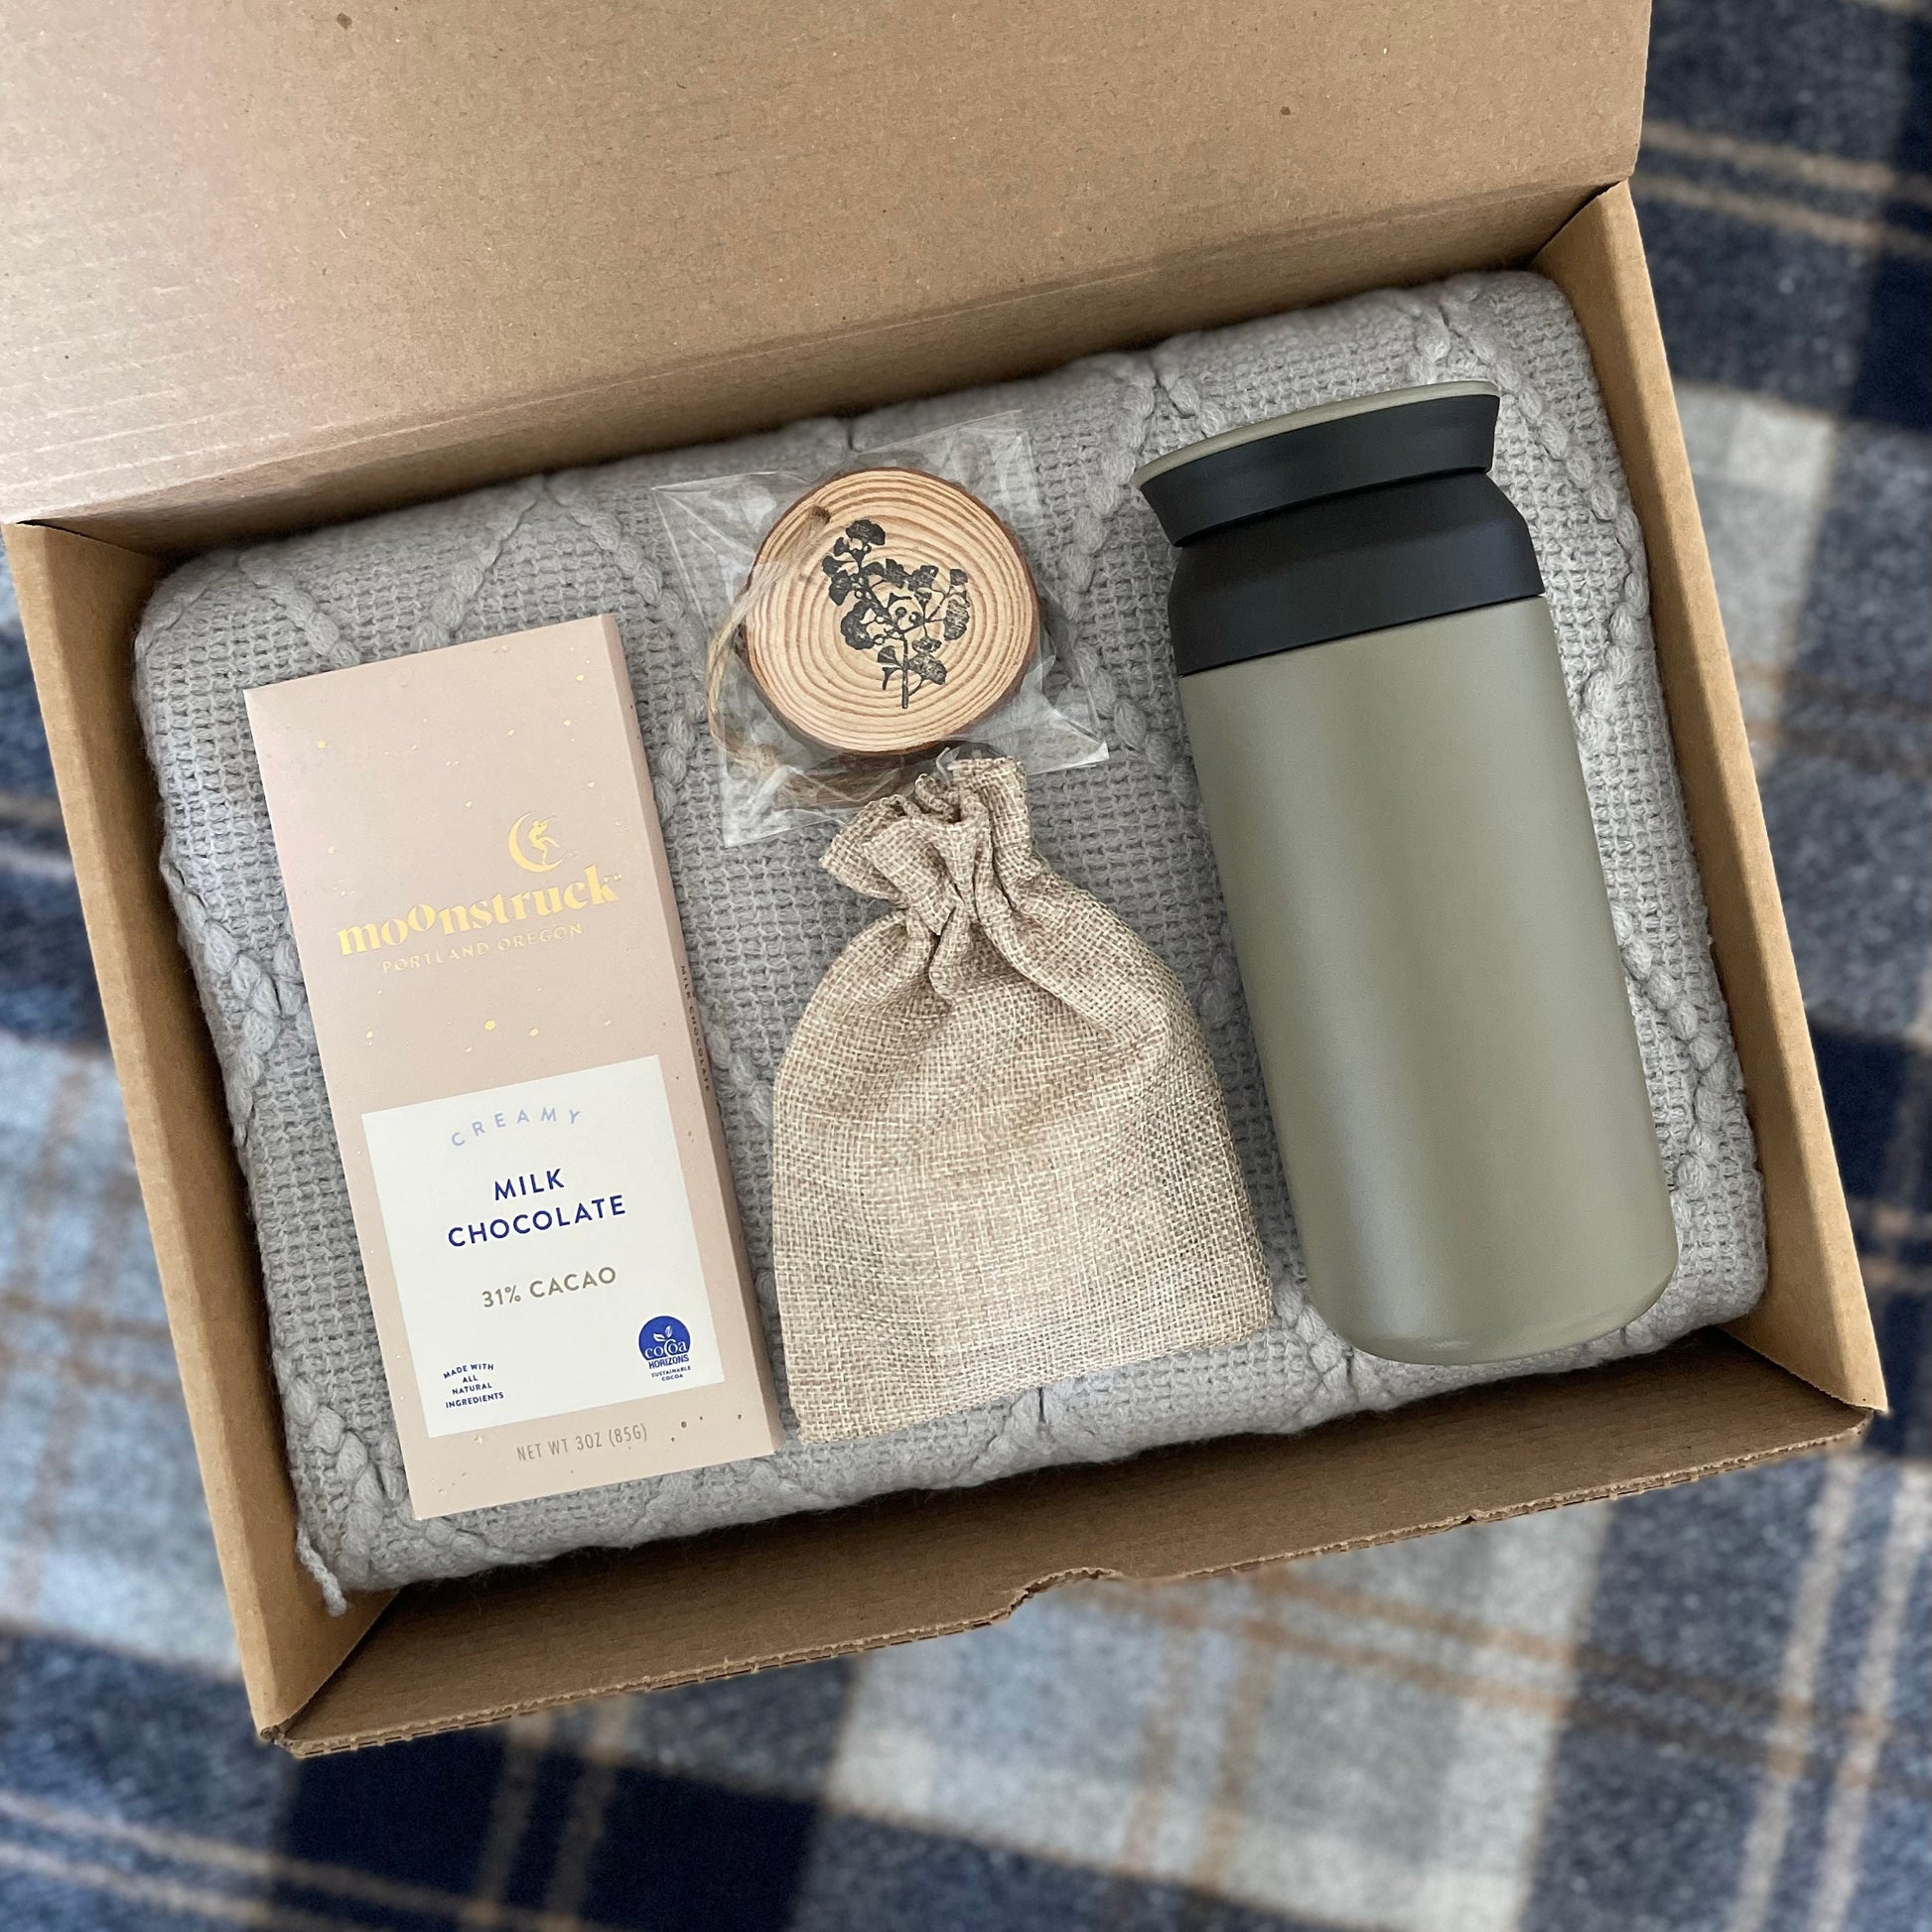 Hygge Gift Box with Blanket for DAD | Best Dad Present, Gift for Father's Day, Father’s Day Gift for Stepdad, Grandfather, Godfather, Dad - happyhyggegifts.com